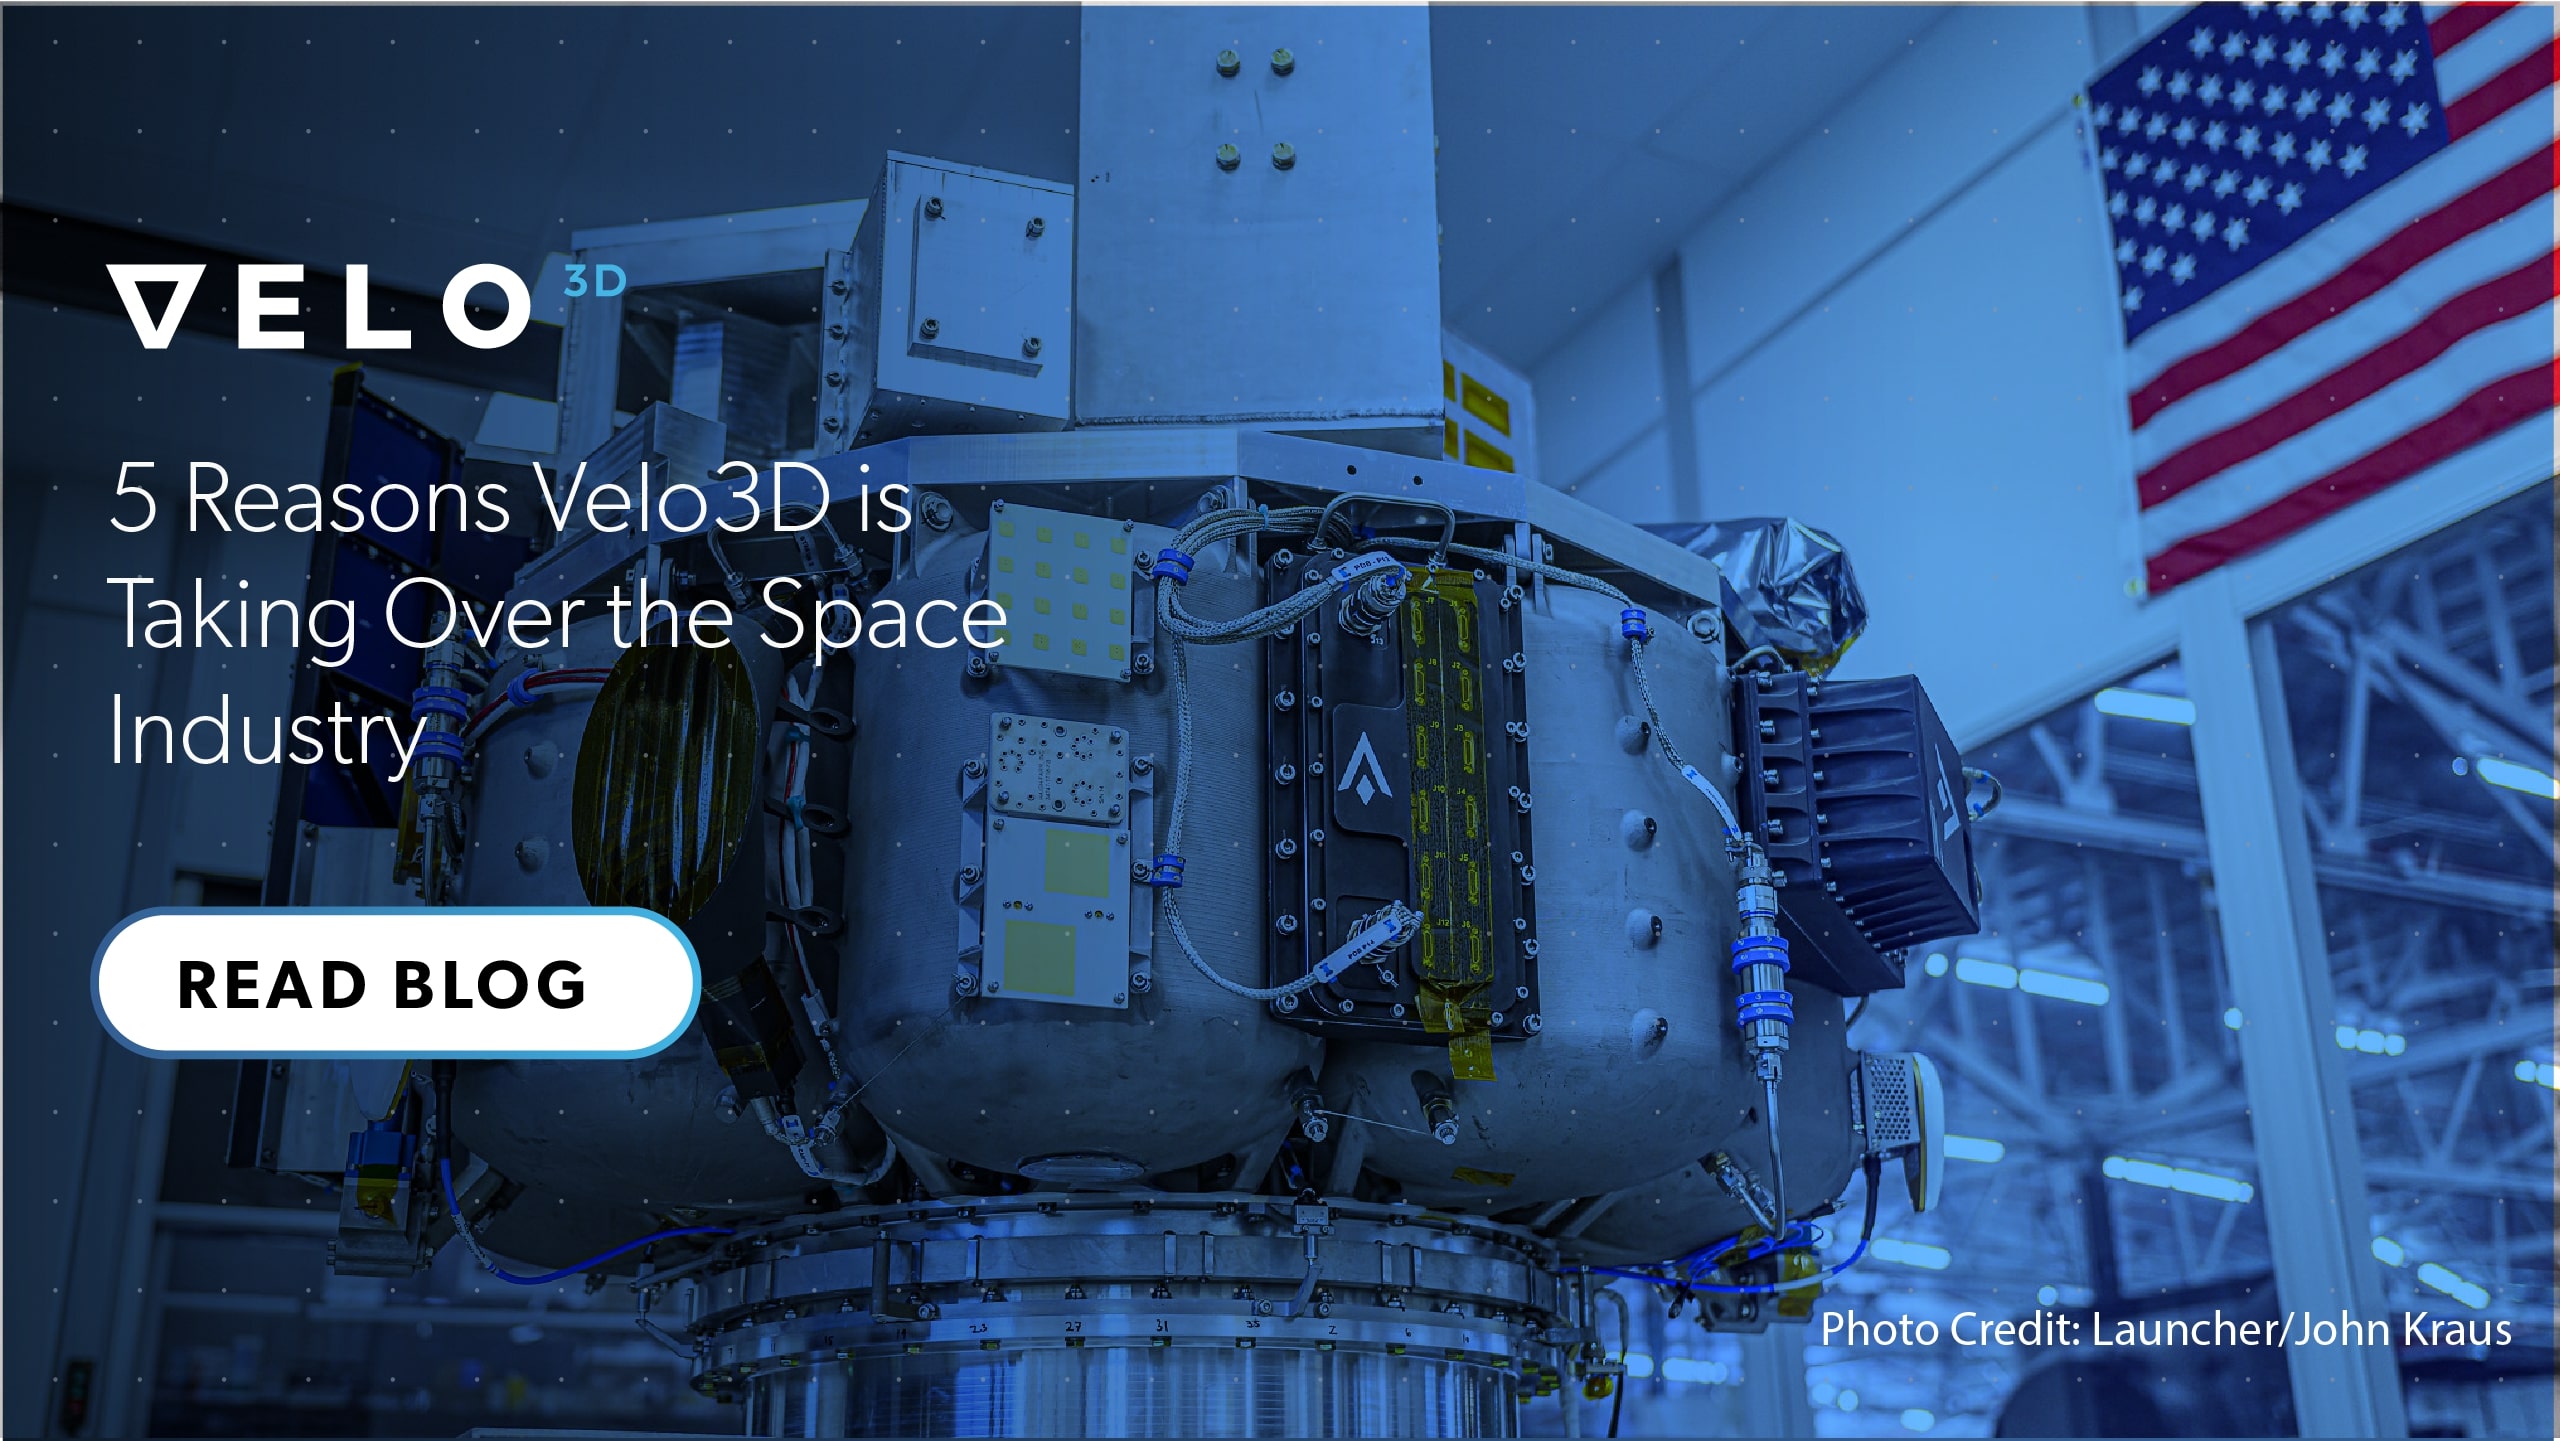 5 Reasons Velo3D is Taking Over the Space Industry